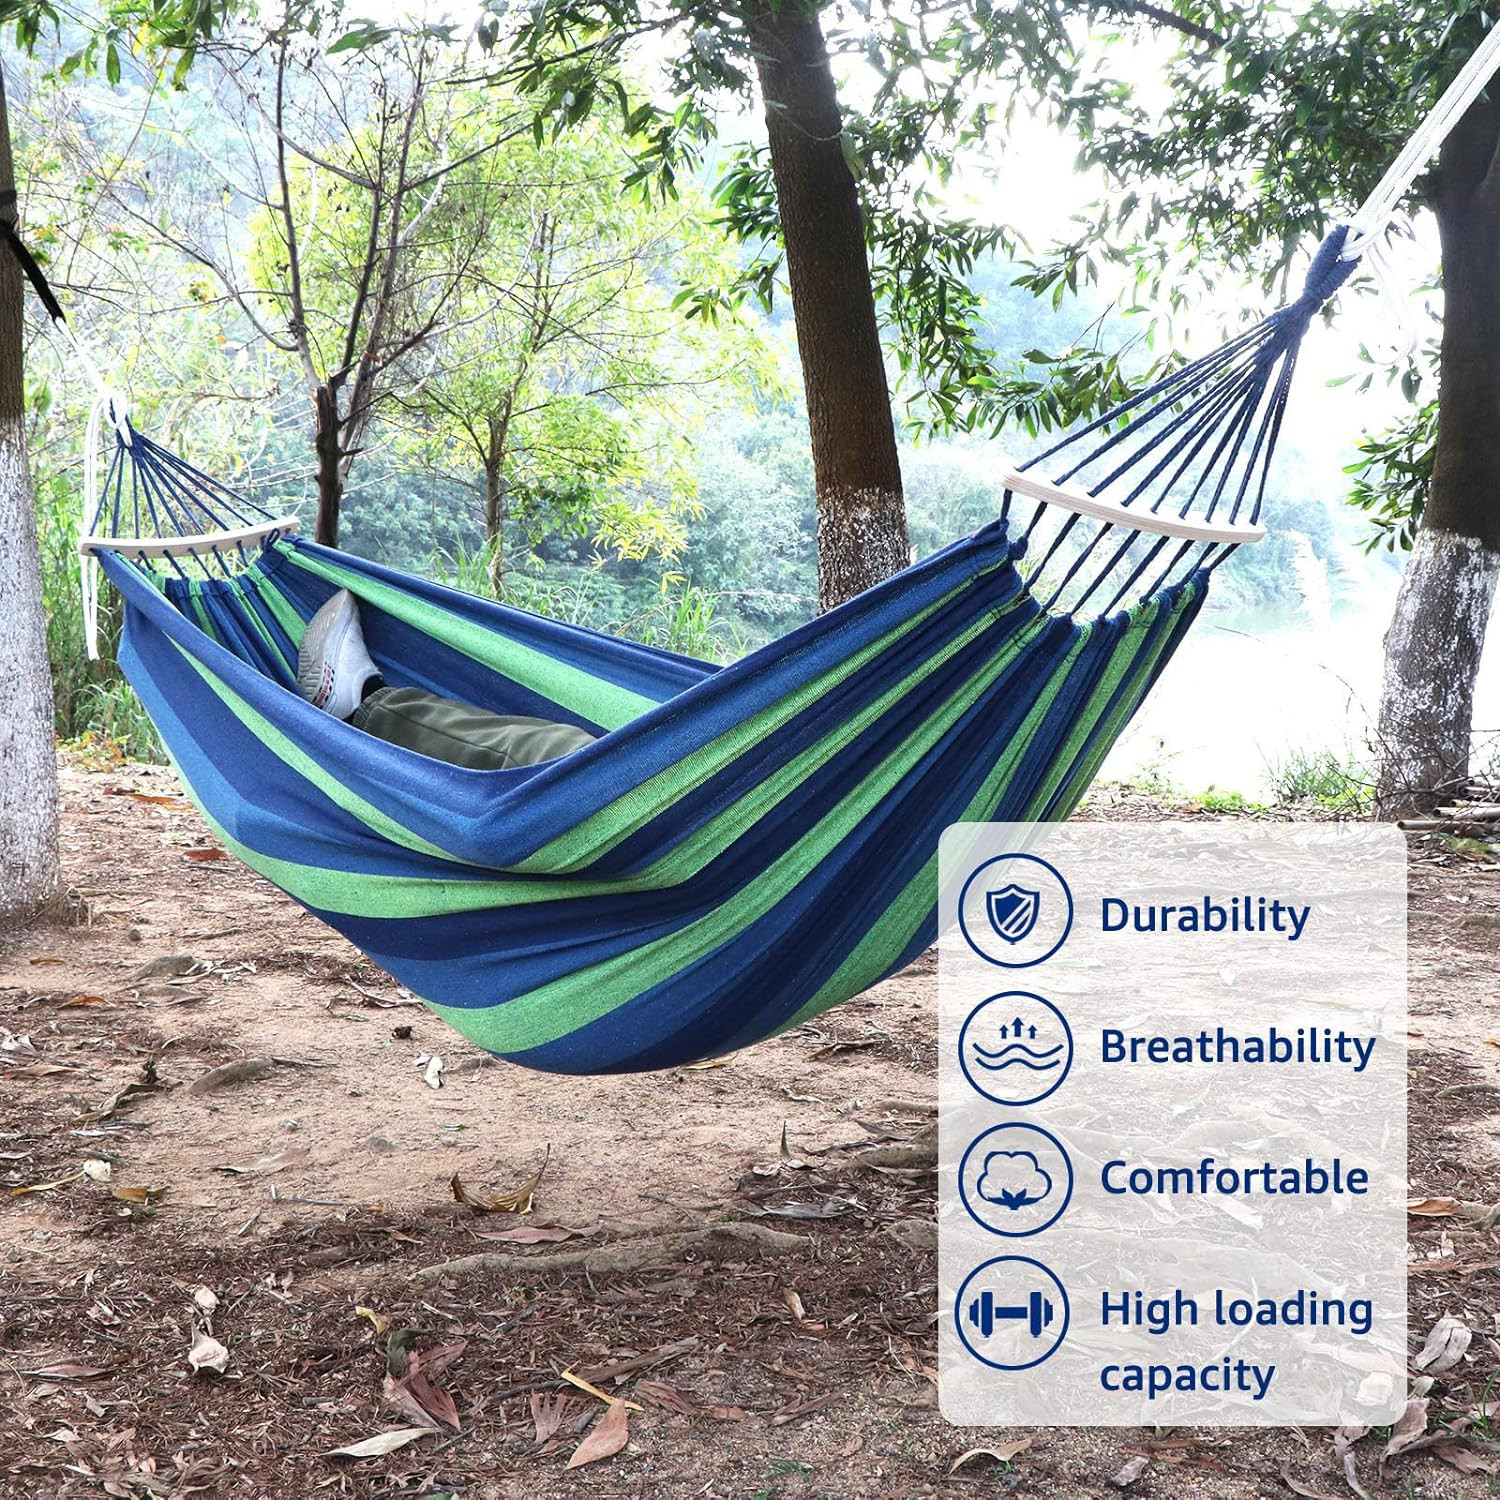 Kuber Industries Canvas Travel Hammock |Garden Hammock Swing For Adults|130 KG Load Bearing Capicity|Including 2 Rope, 1 Bag (Blue & Green)